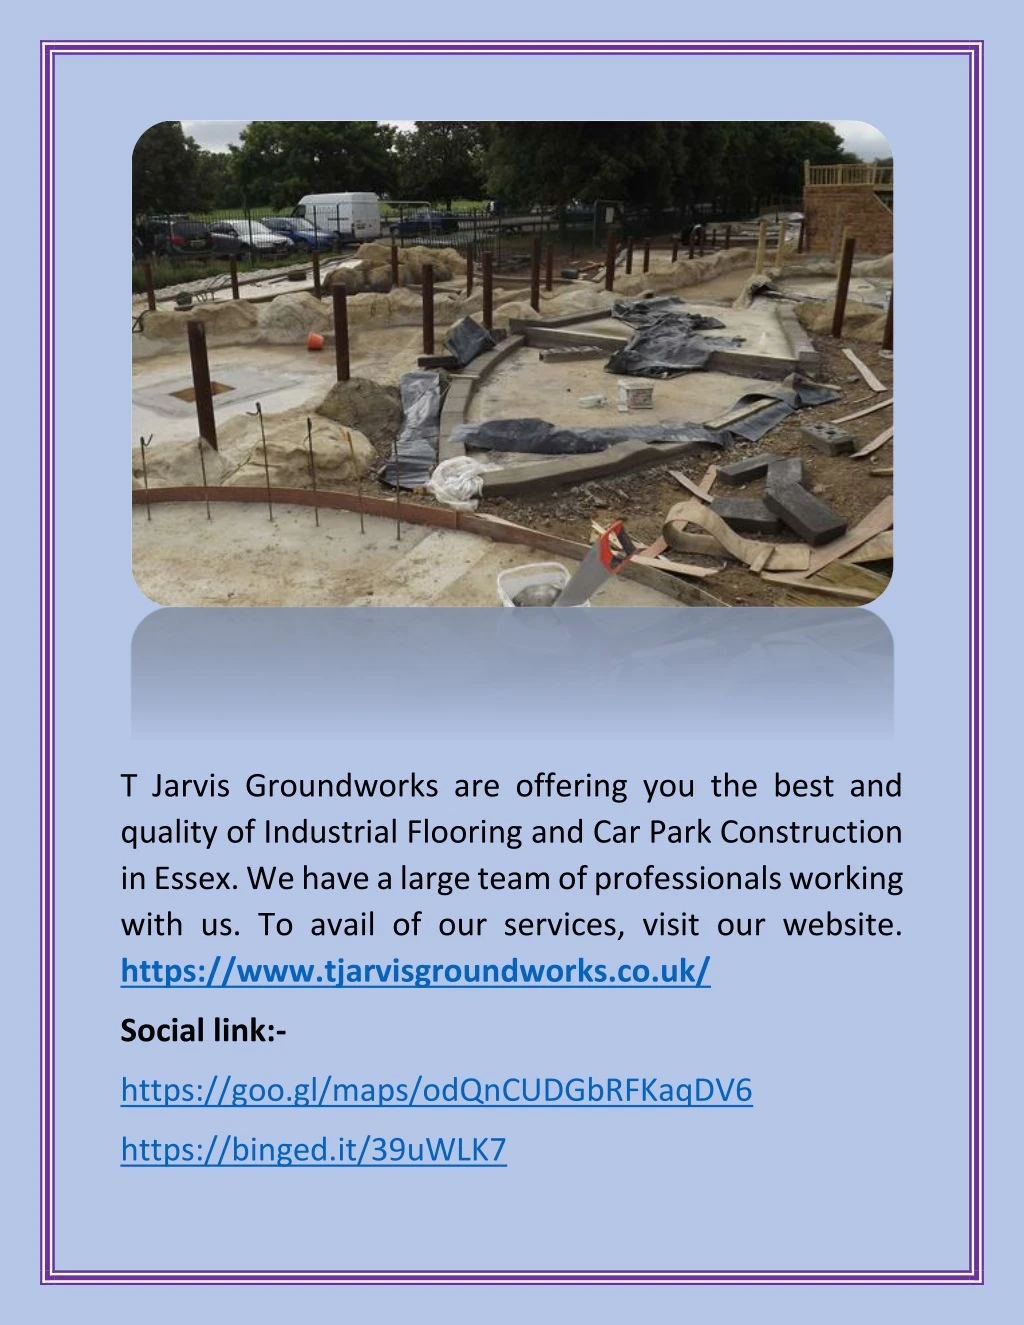 t jarvis groundworks are offering you the best